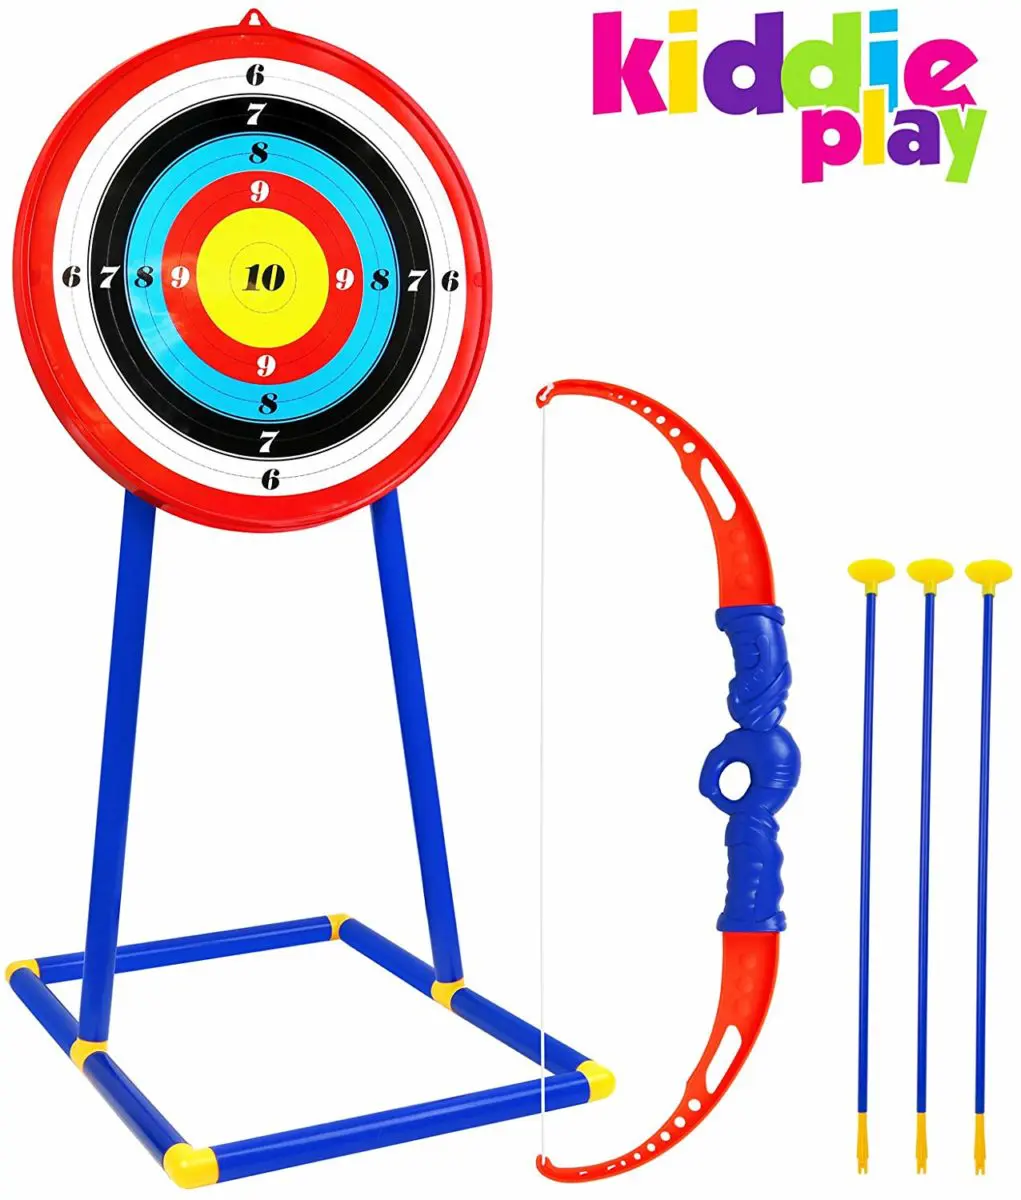 Kiddie Play Toy Archery Set - Top Toys and Gifts for Four Year Old Boys 1